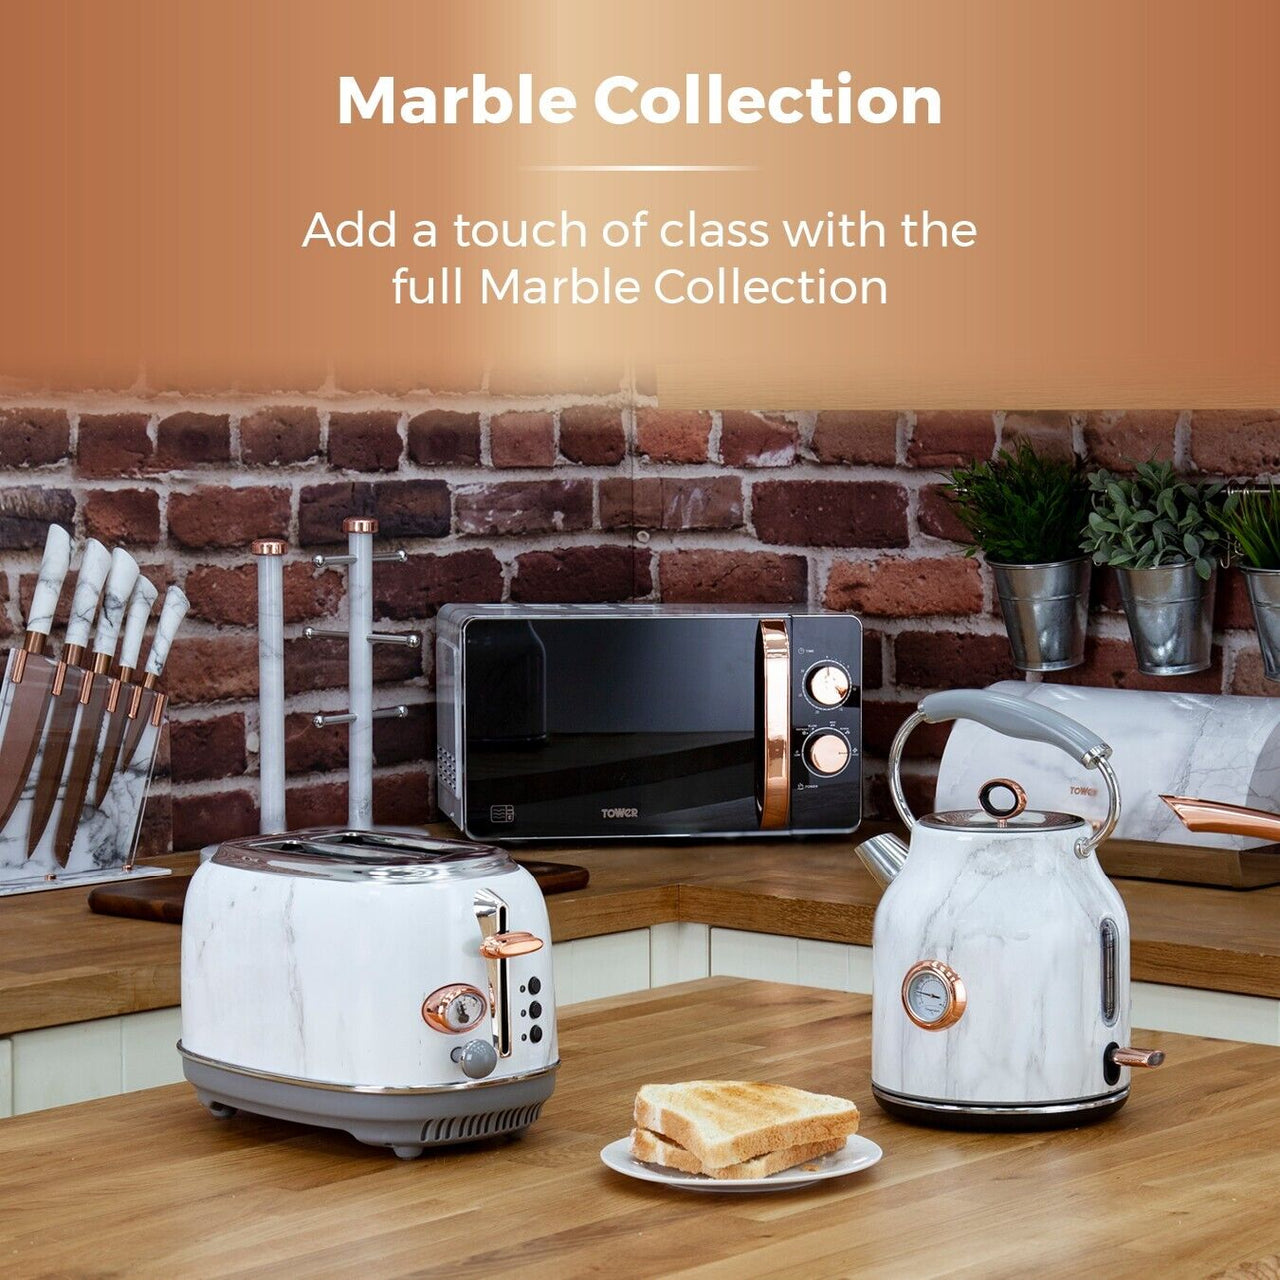 Tower Marble Rose Gold Kettle Toaster Breadbin 3 Canisters Matching Kitchen Set